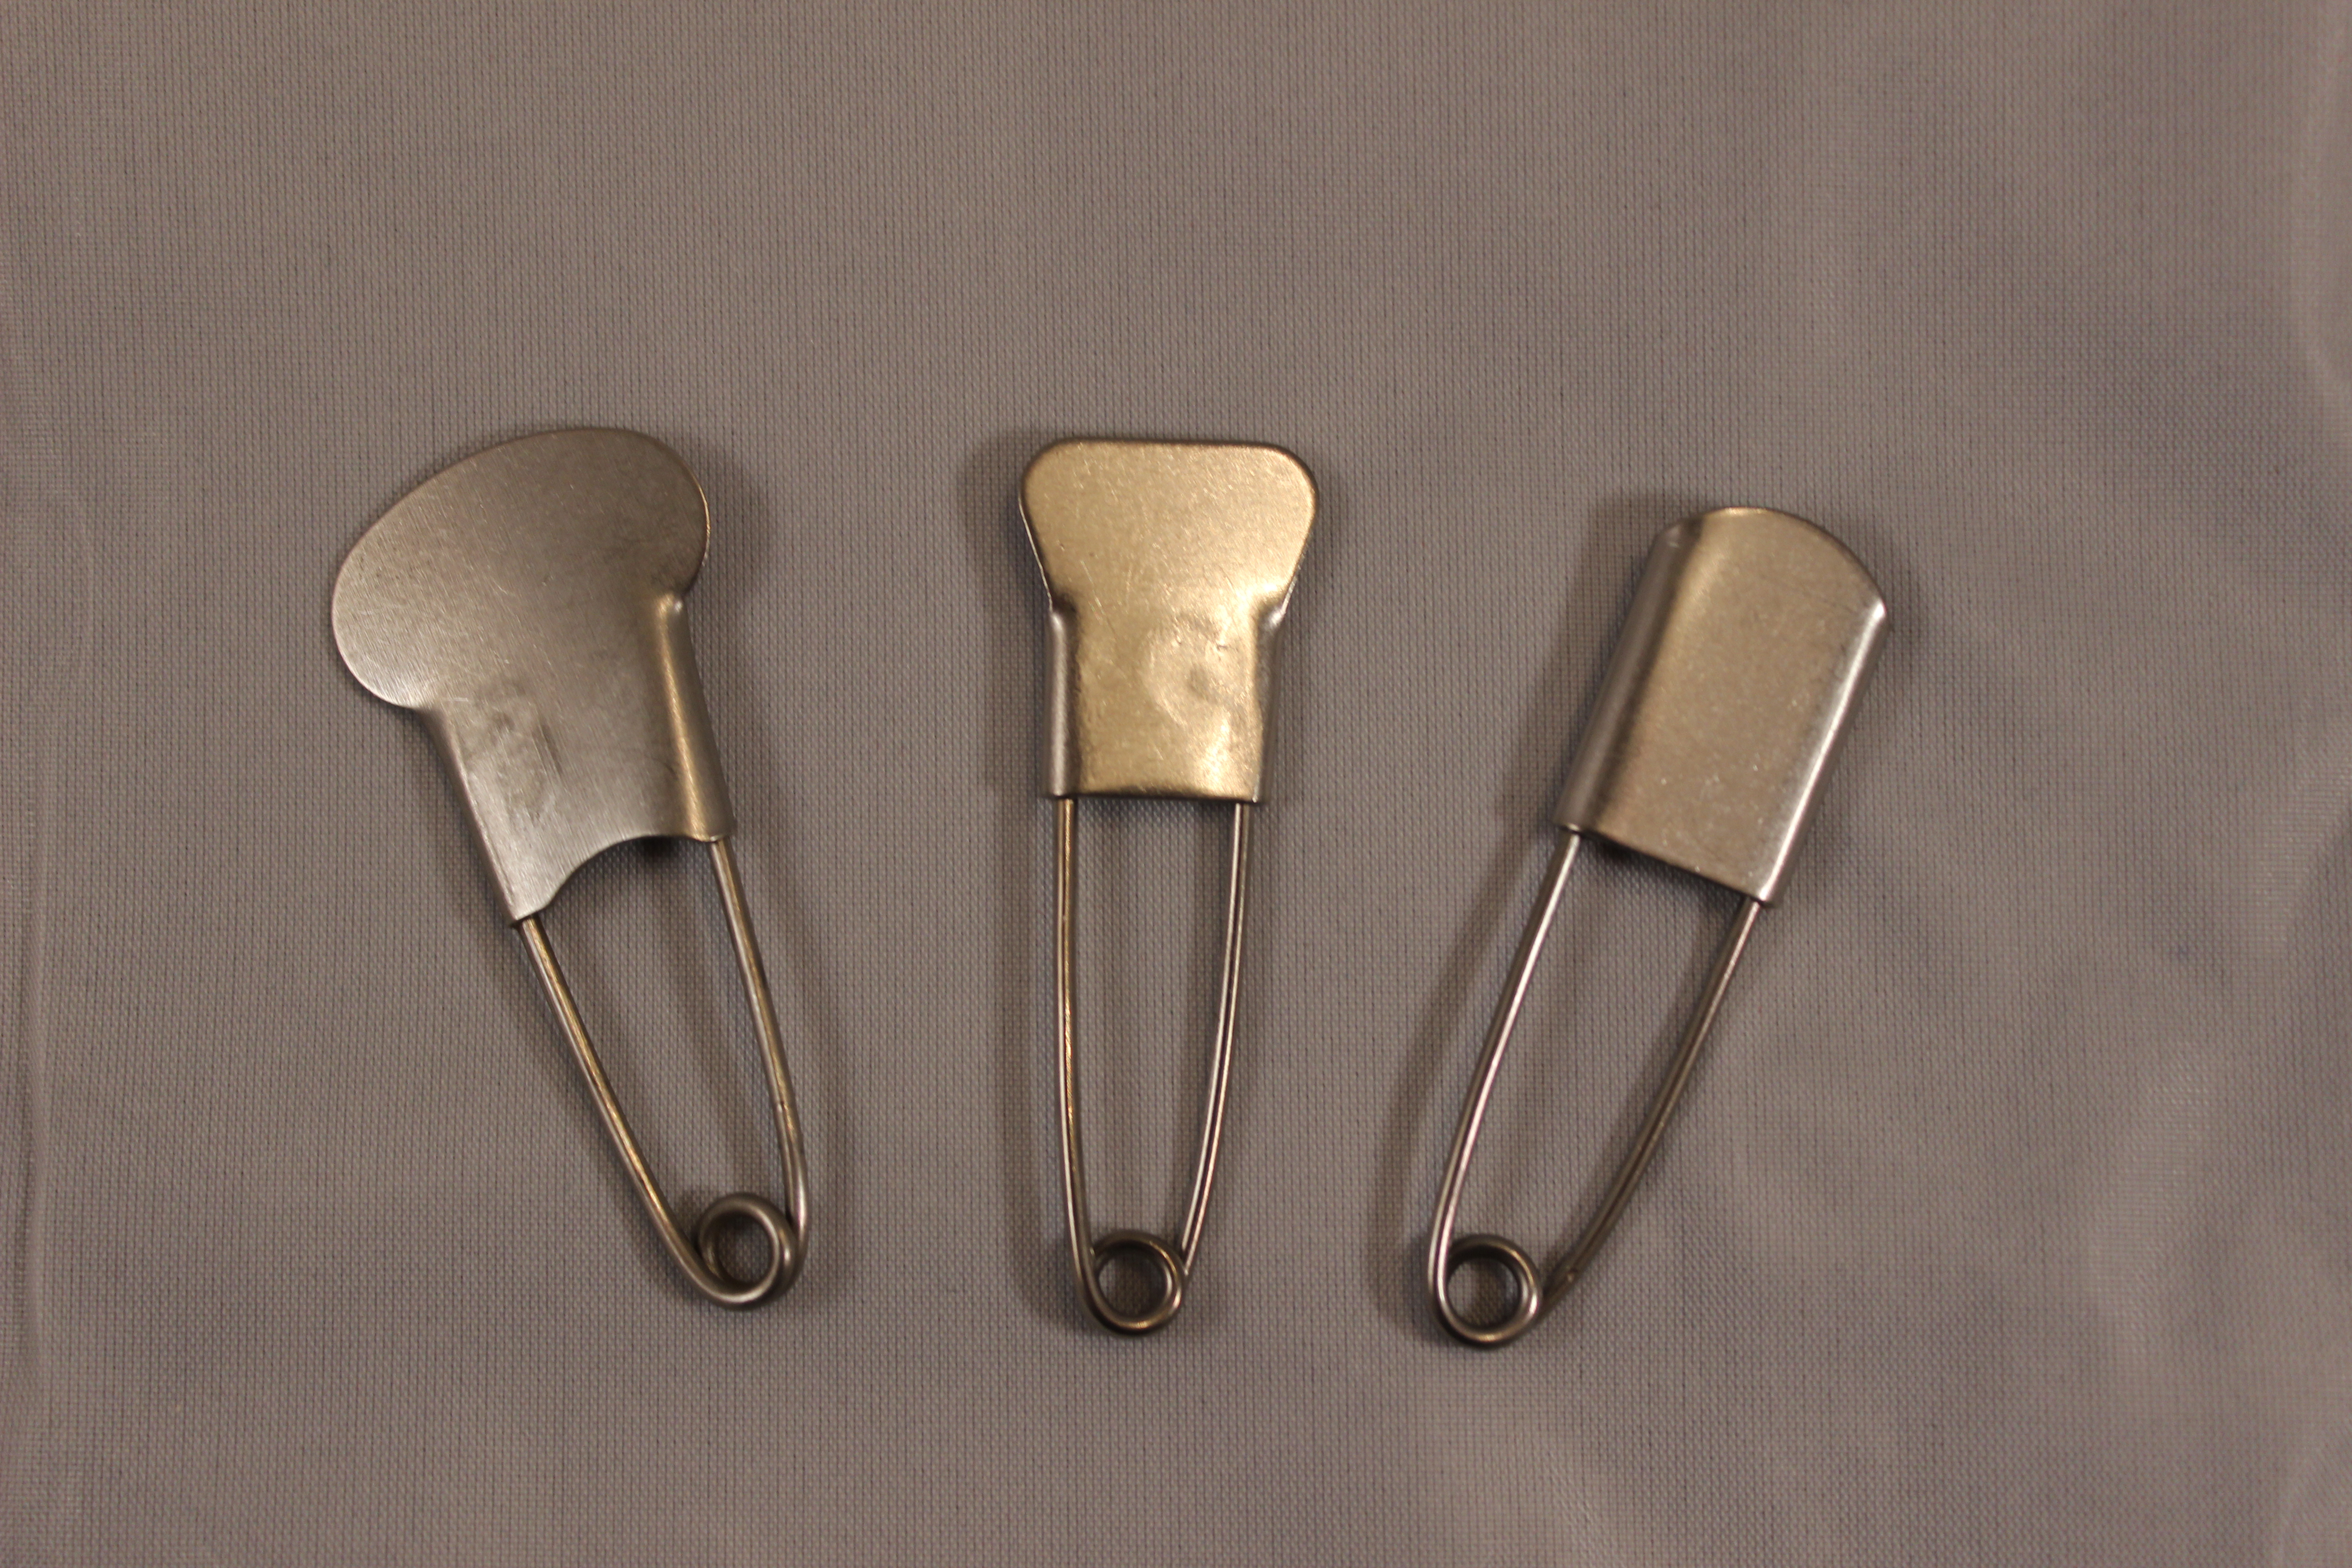 Dress Maker Pins - Wholesale Prices on Safety Pins by Strang Advance